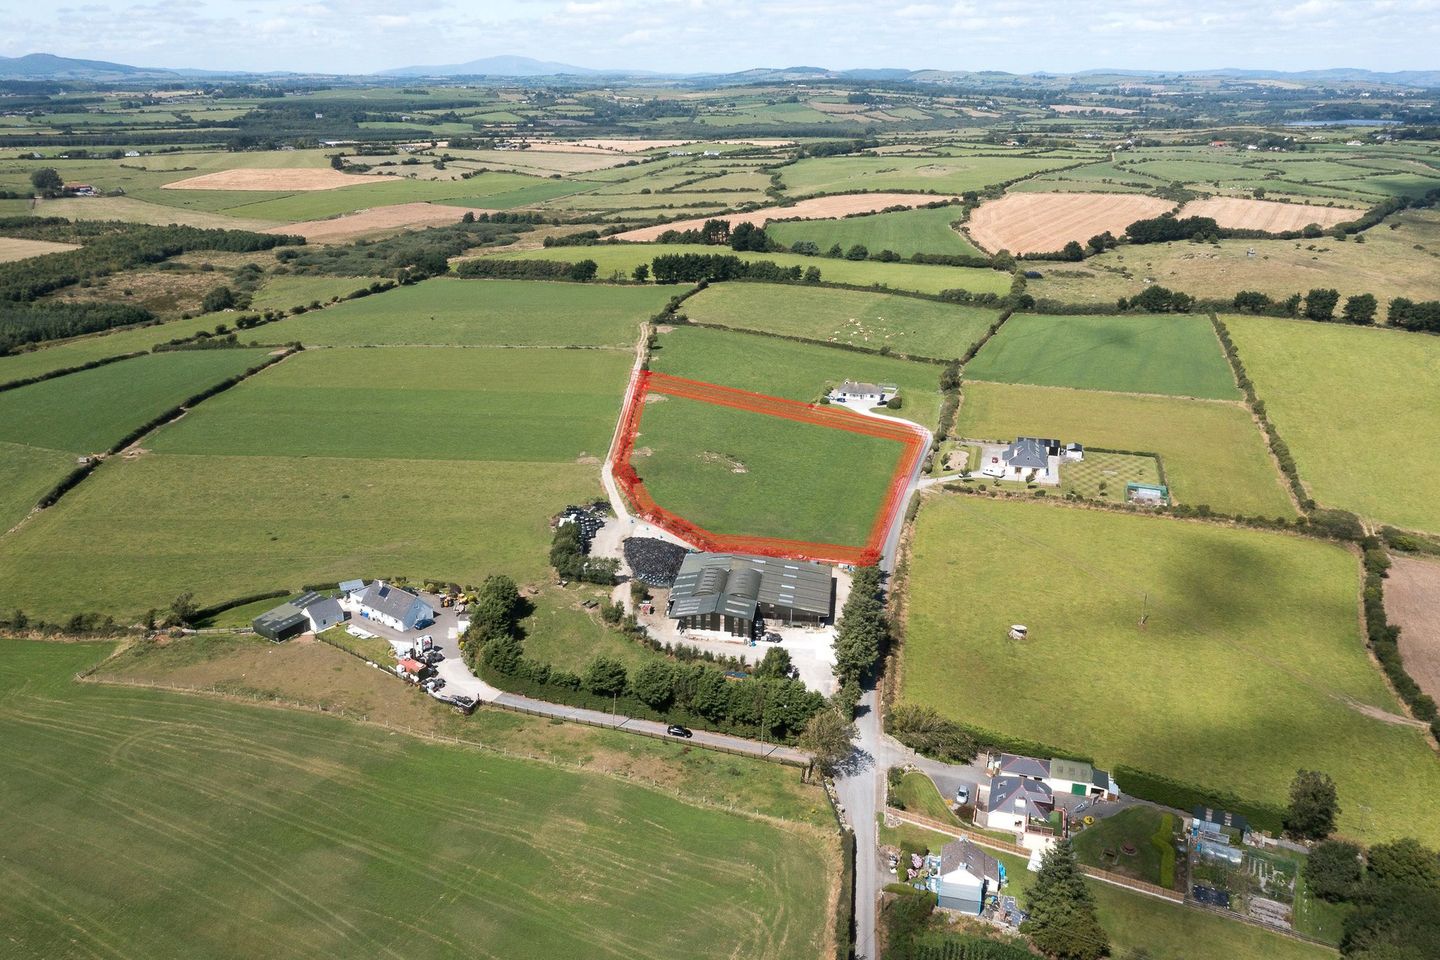 C. 3.7497 Acres Of Land In, Ballinageeragh